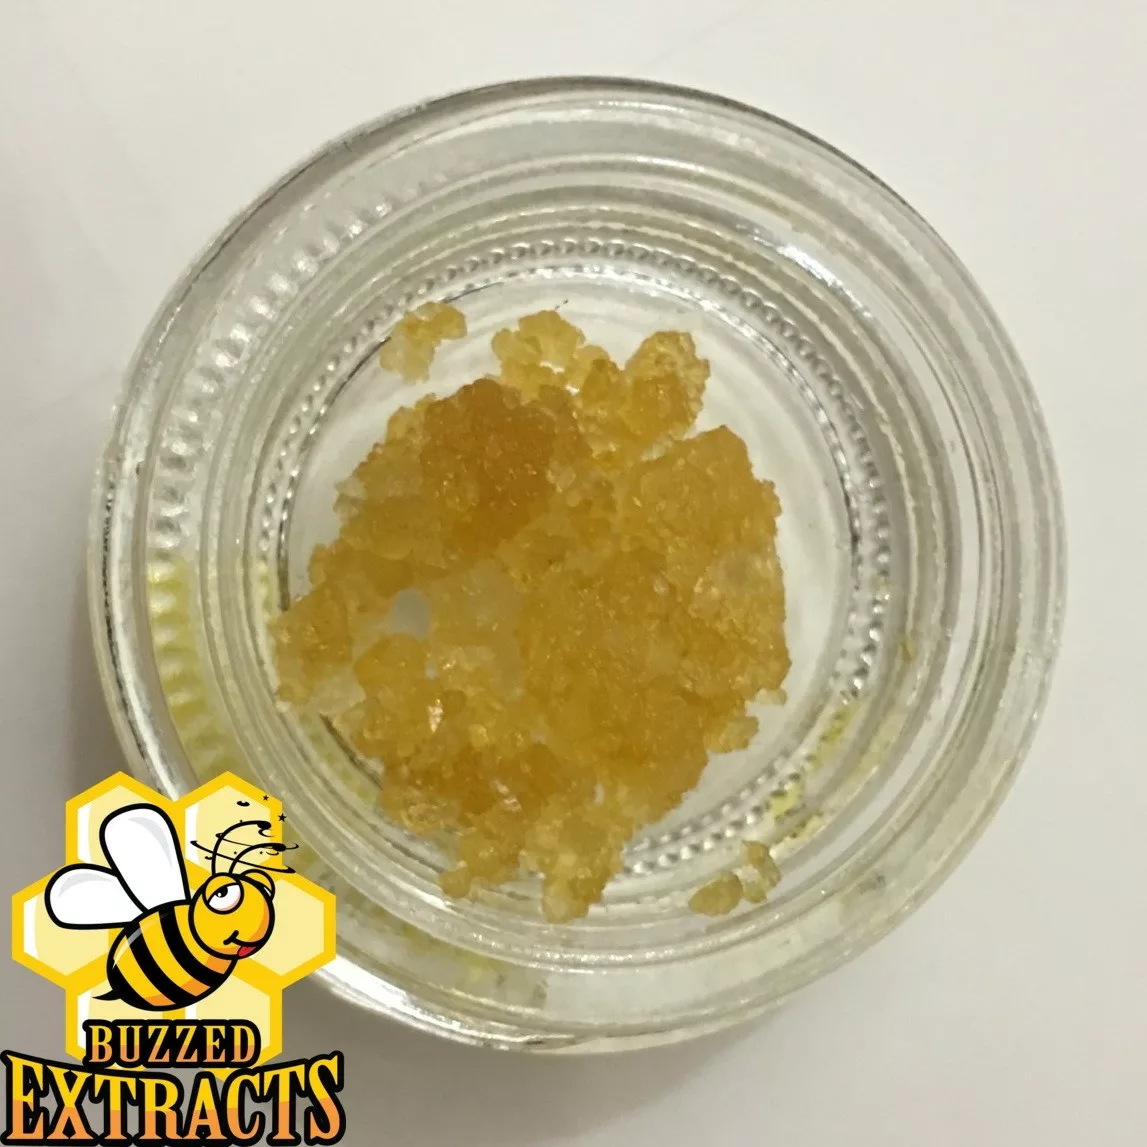 Buzzed Extracts - 1:1 Caviar